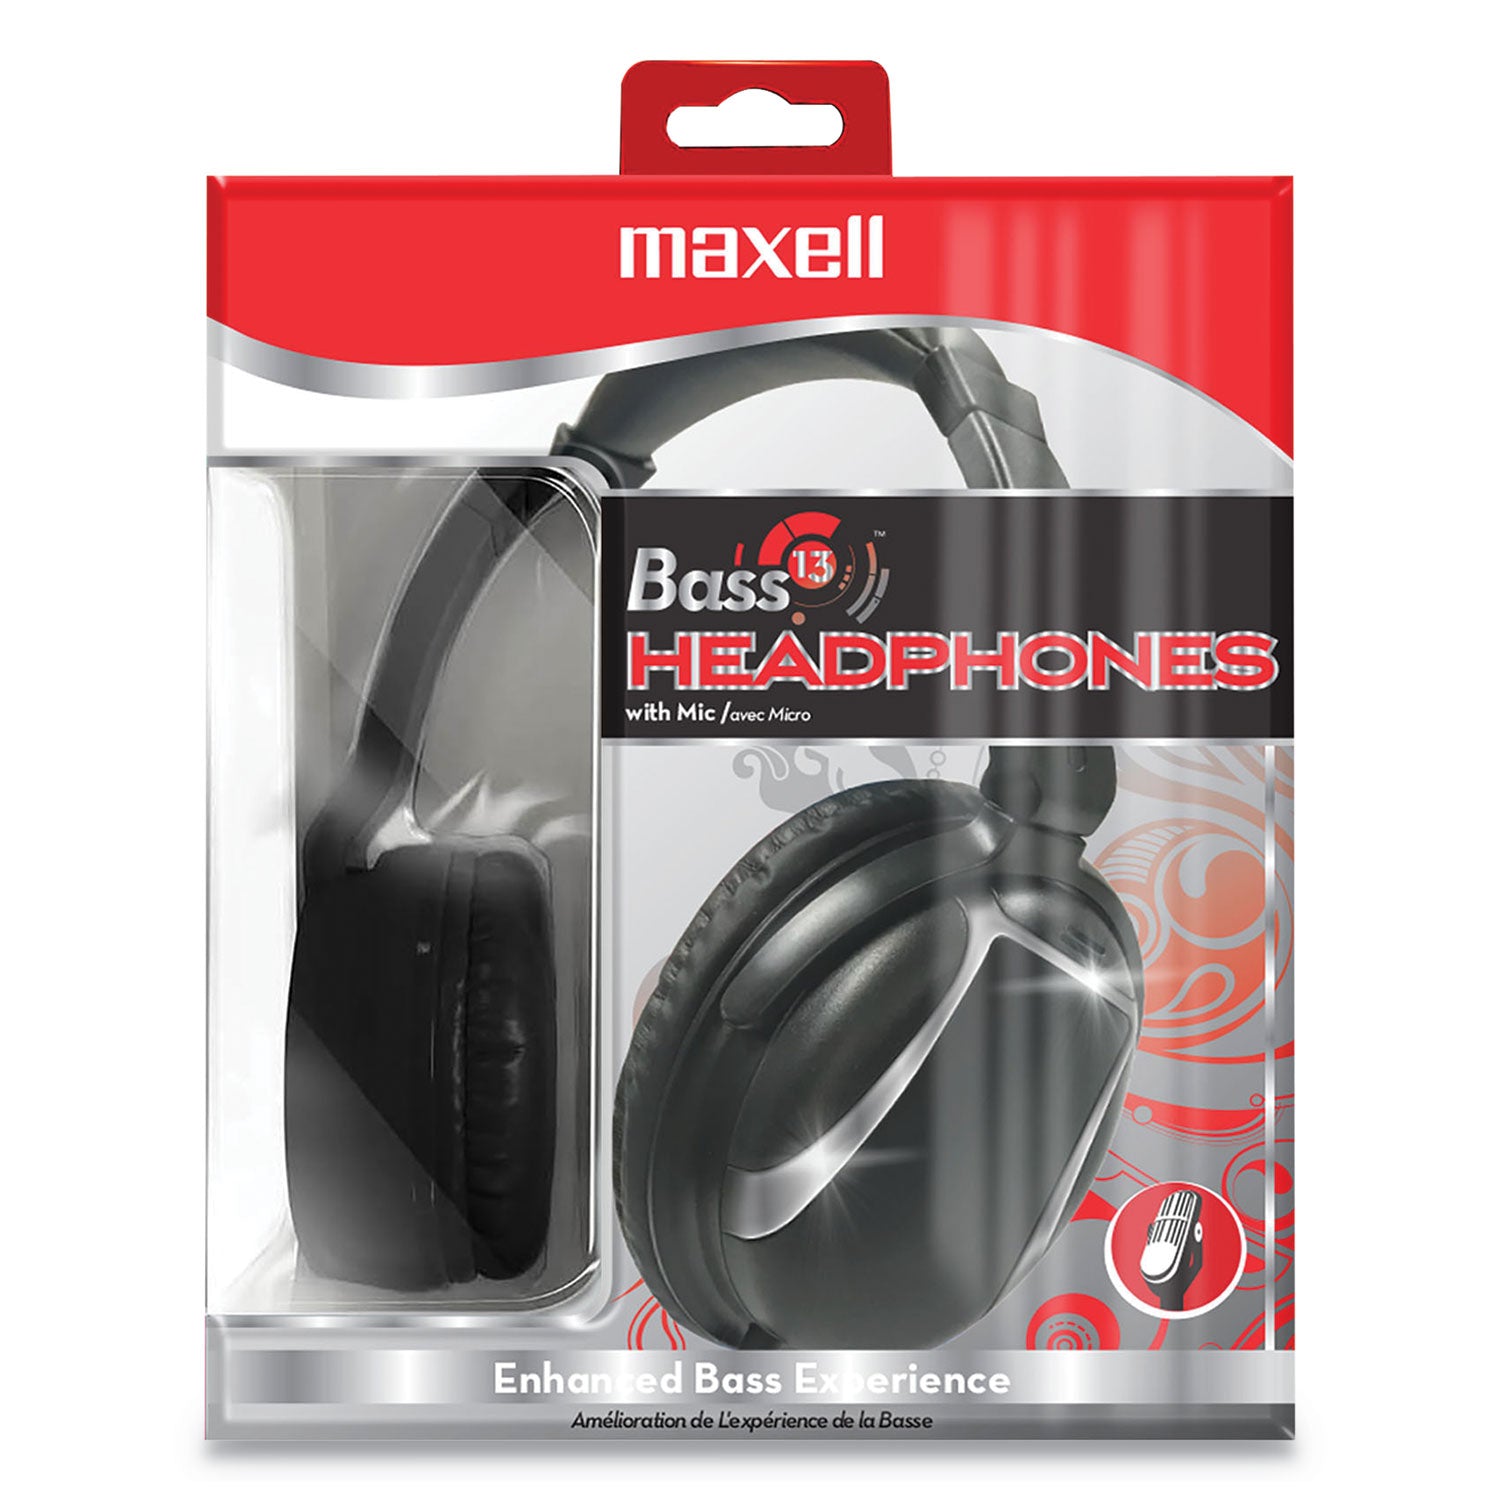 bass-13-headphone-with-mic-4-ft-cord-black_max199840 - 2